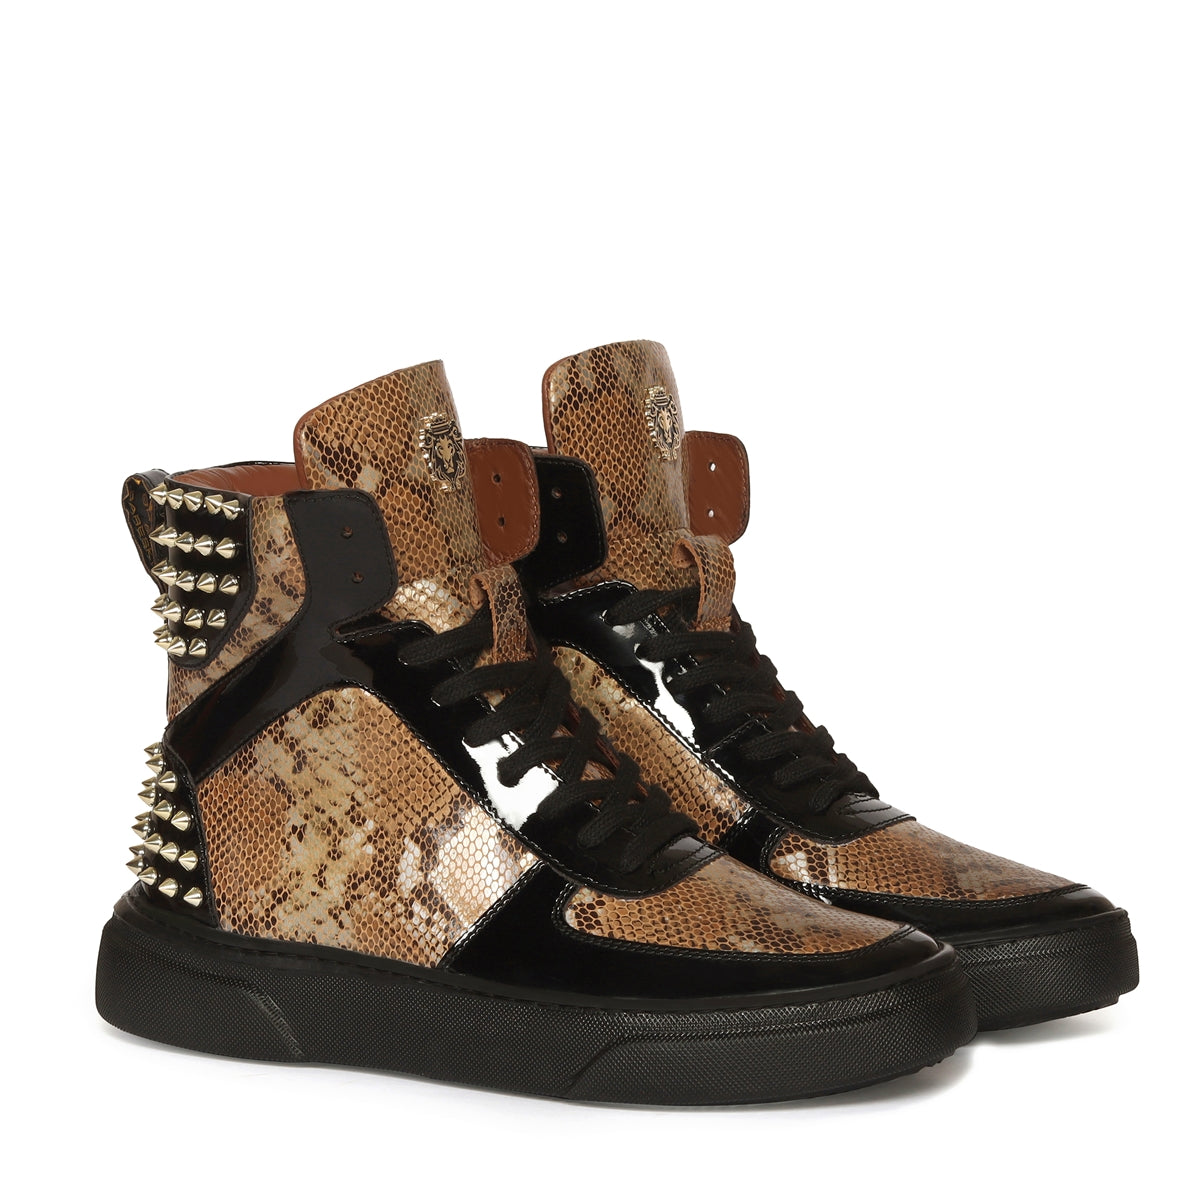 Studded High Top Sneakers Snake Print with Patent Leather Detailing